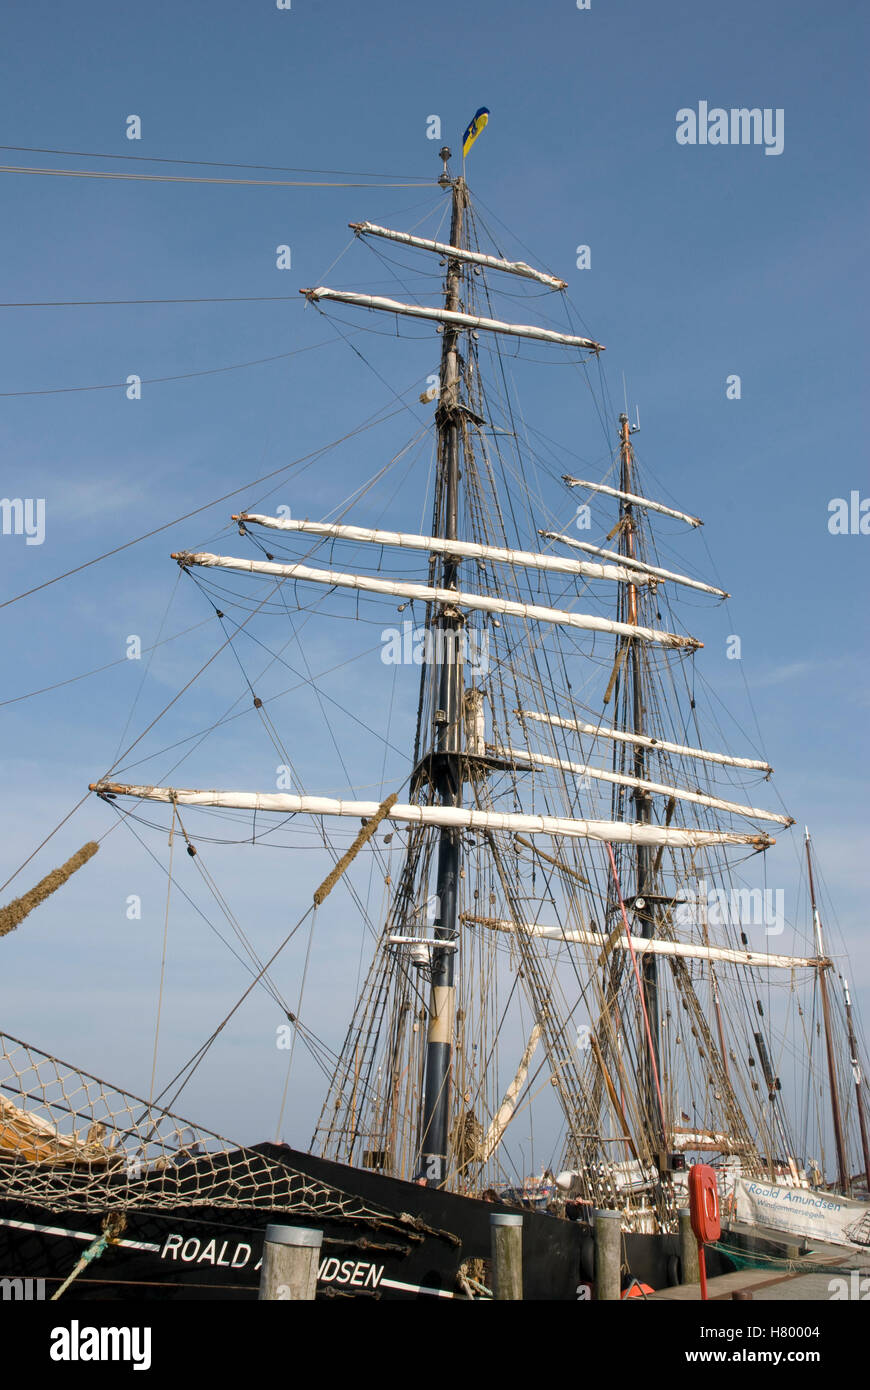 Masts of a sailing ship in the harbor, Eckernfoerde, Schleswig-Holstein Stock Photo